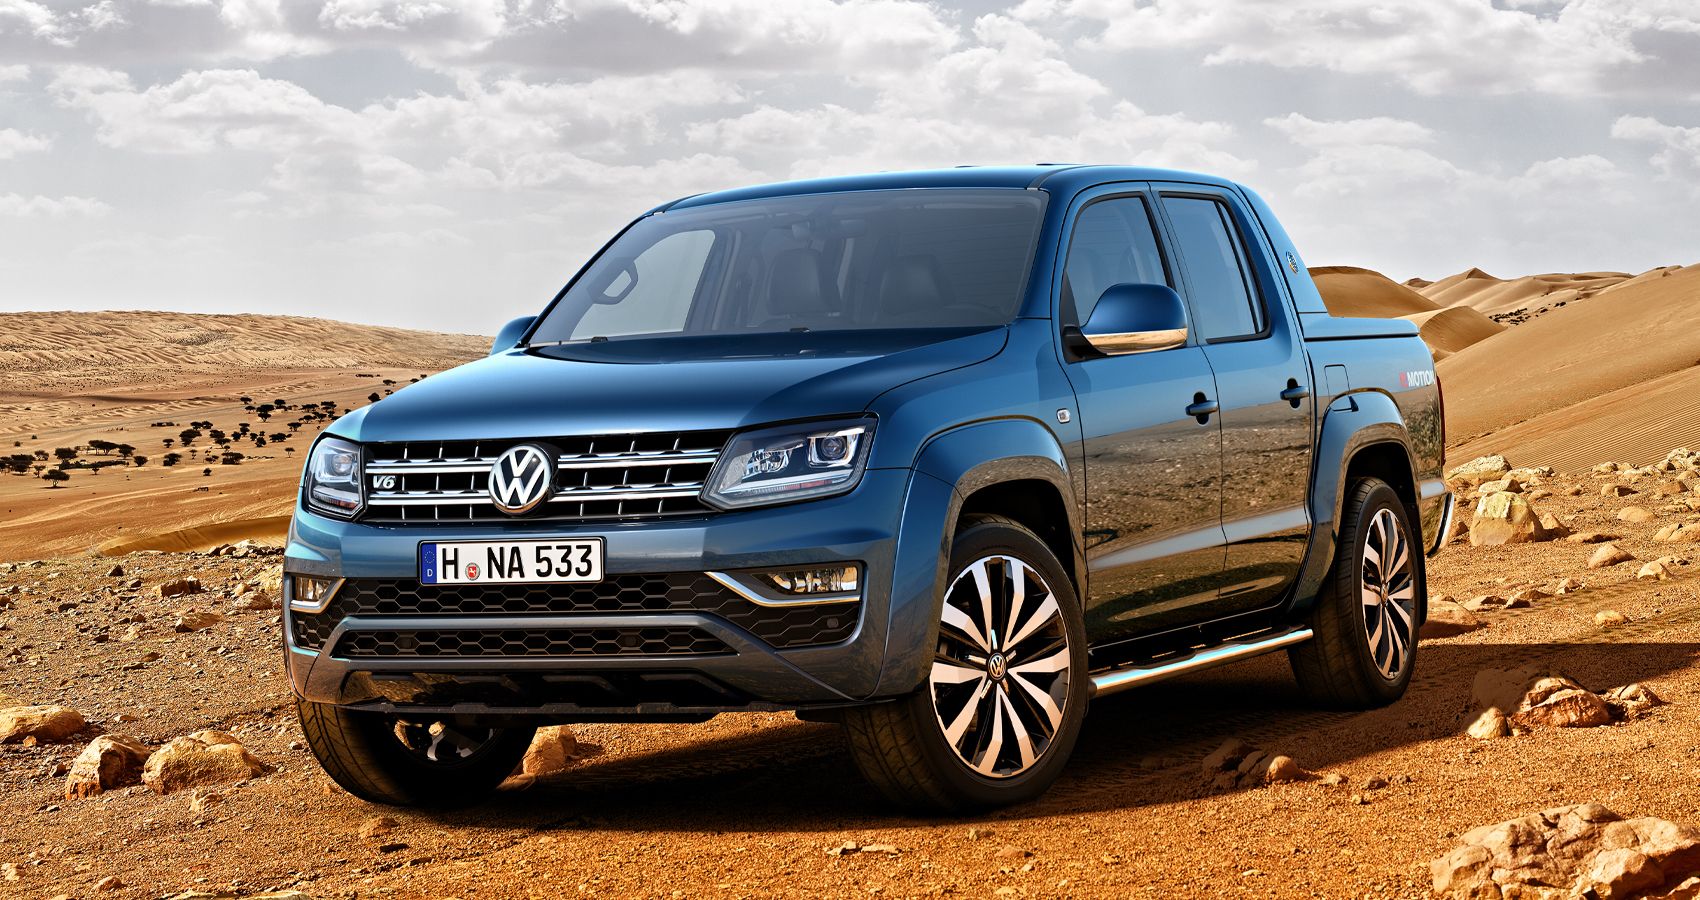 The front of a blue Amarok